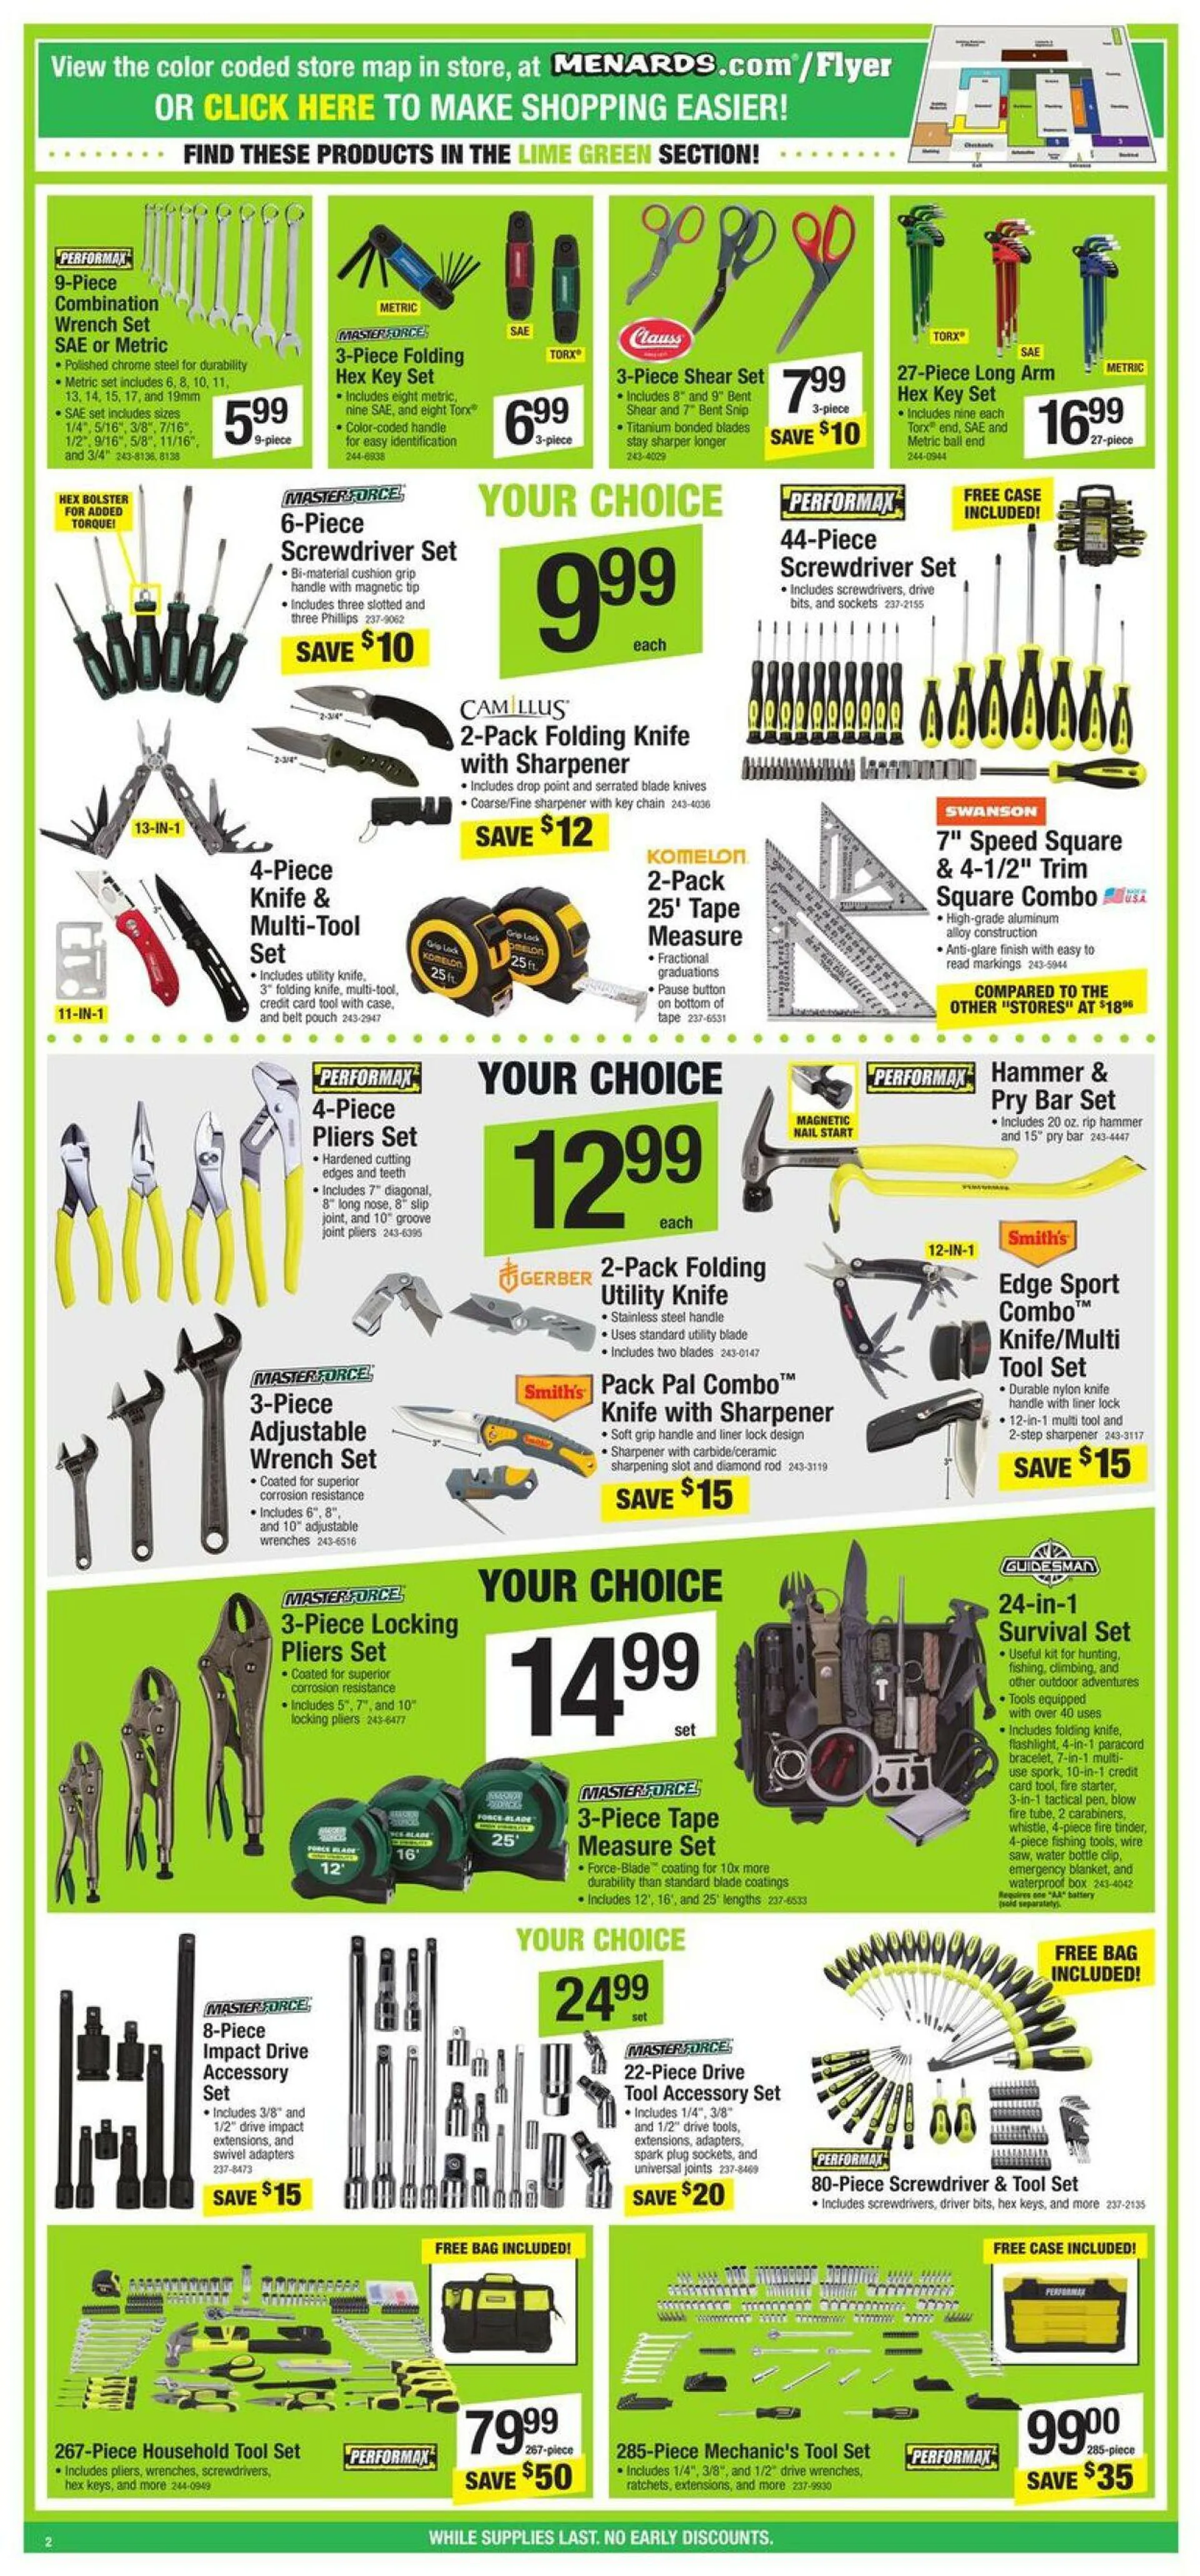 Menards Current weekly ad - 3